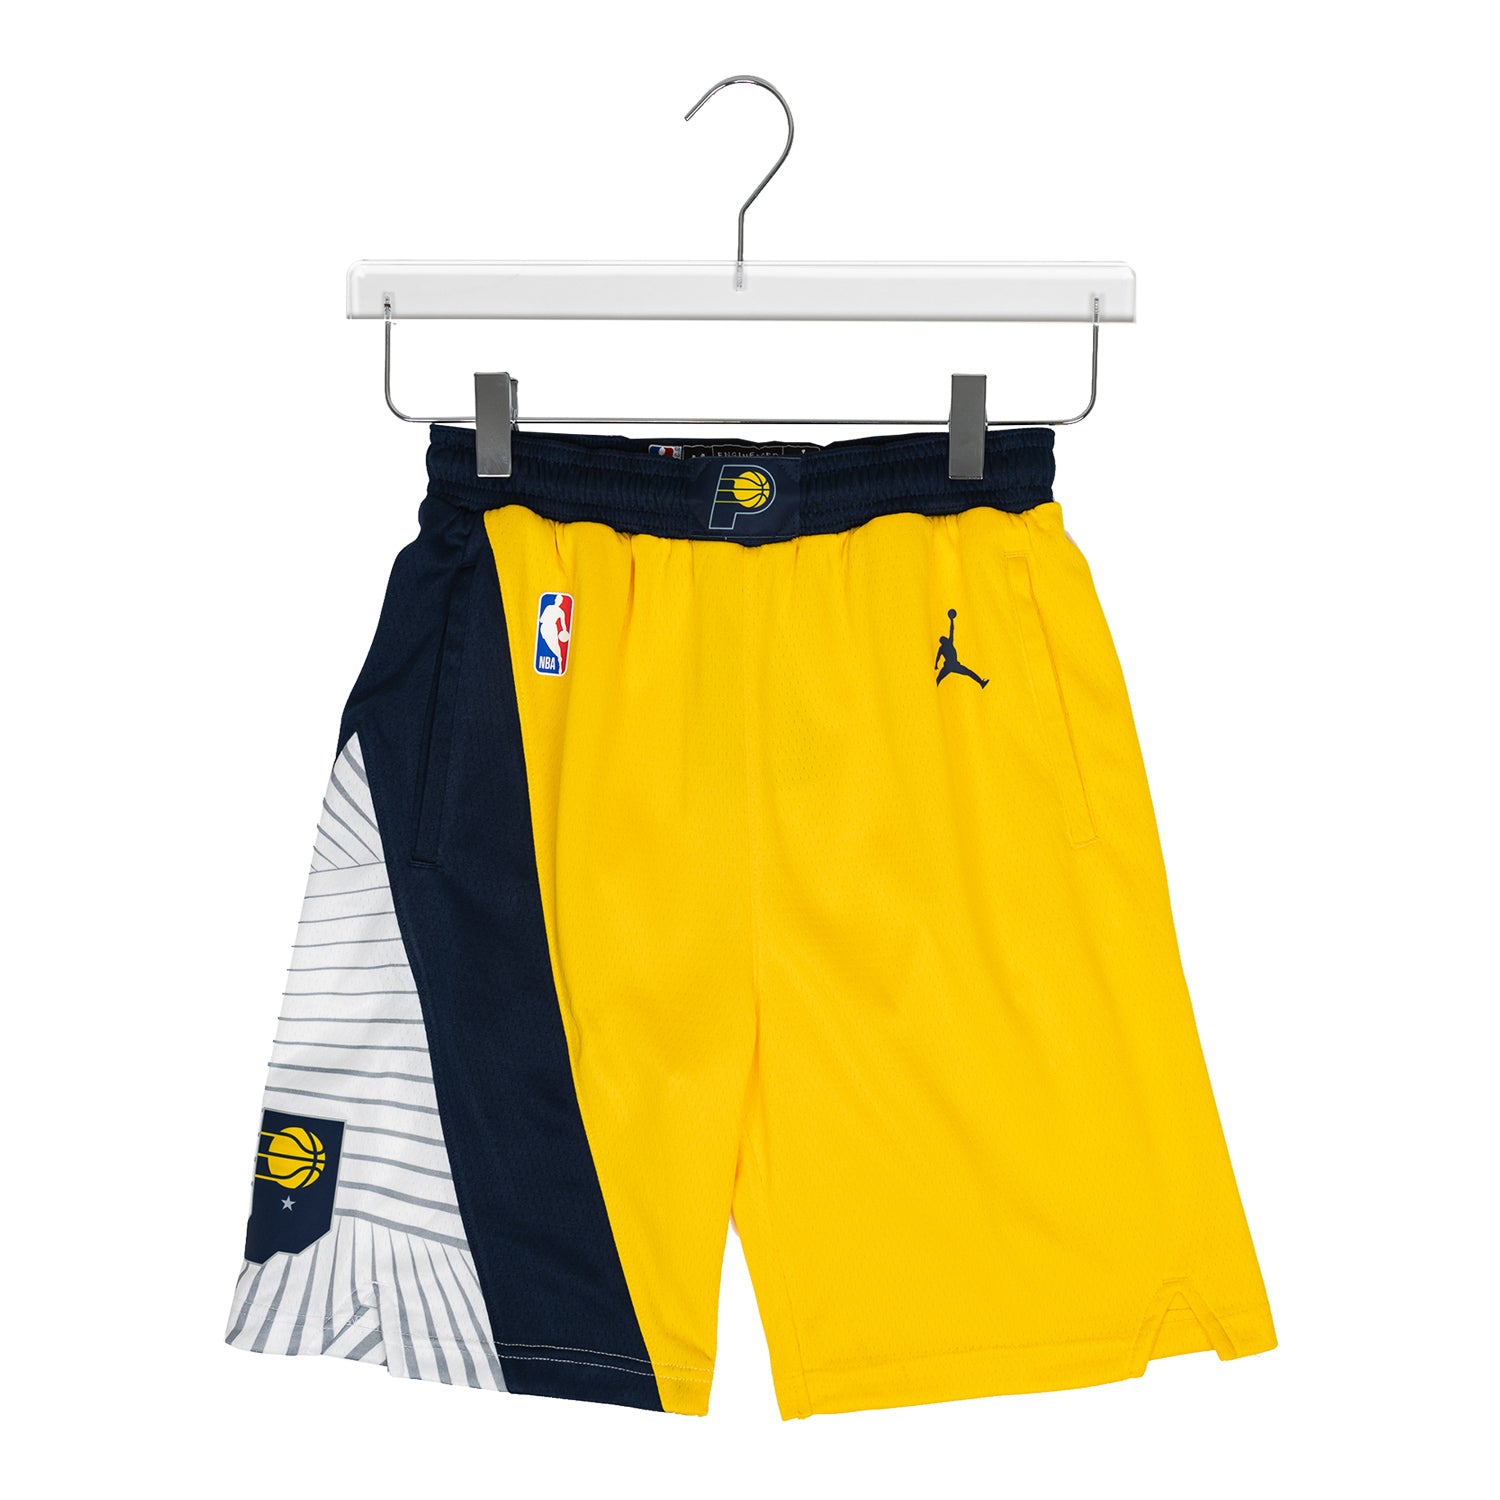 Mitchell & Ness Shorts - Authentic Shorts, NBA Shorts, Swingman Shorts with  Pockets, and More